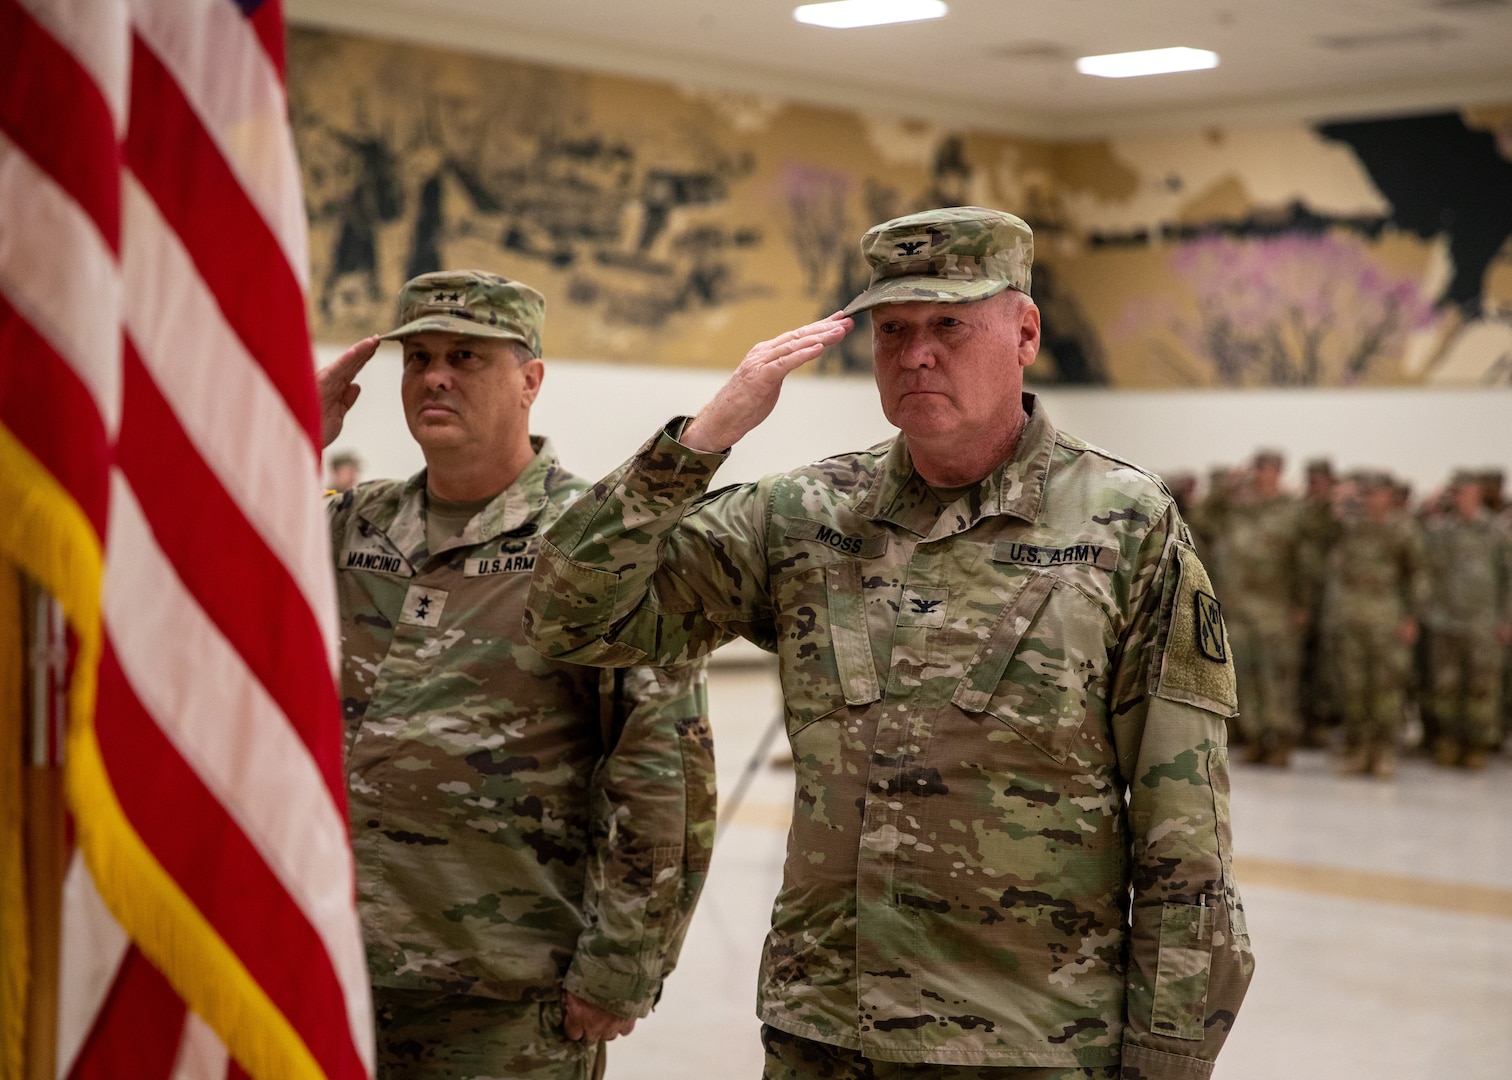 Col. Johnnie Dale Moss, outgoing commander of the 45th Field Artillery Brigade, Oklahoma Army National Guard, and Maj. Gen. Thomas H. Mancino, adjutant general for Oklahoma, salute for the playing of the National Anthem during a change of command ceremony held at the Mustang Armed Forces Reserve Center in Mustang, Oklahoma, on June 15, 2024. The changing of command signifies the transfer of responsibility from outgoing commander Moss, to incoming commander Lt. Col. Rogers. (Oklahoma National Guard photo by Pfc. Brooklyn Clark)